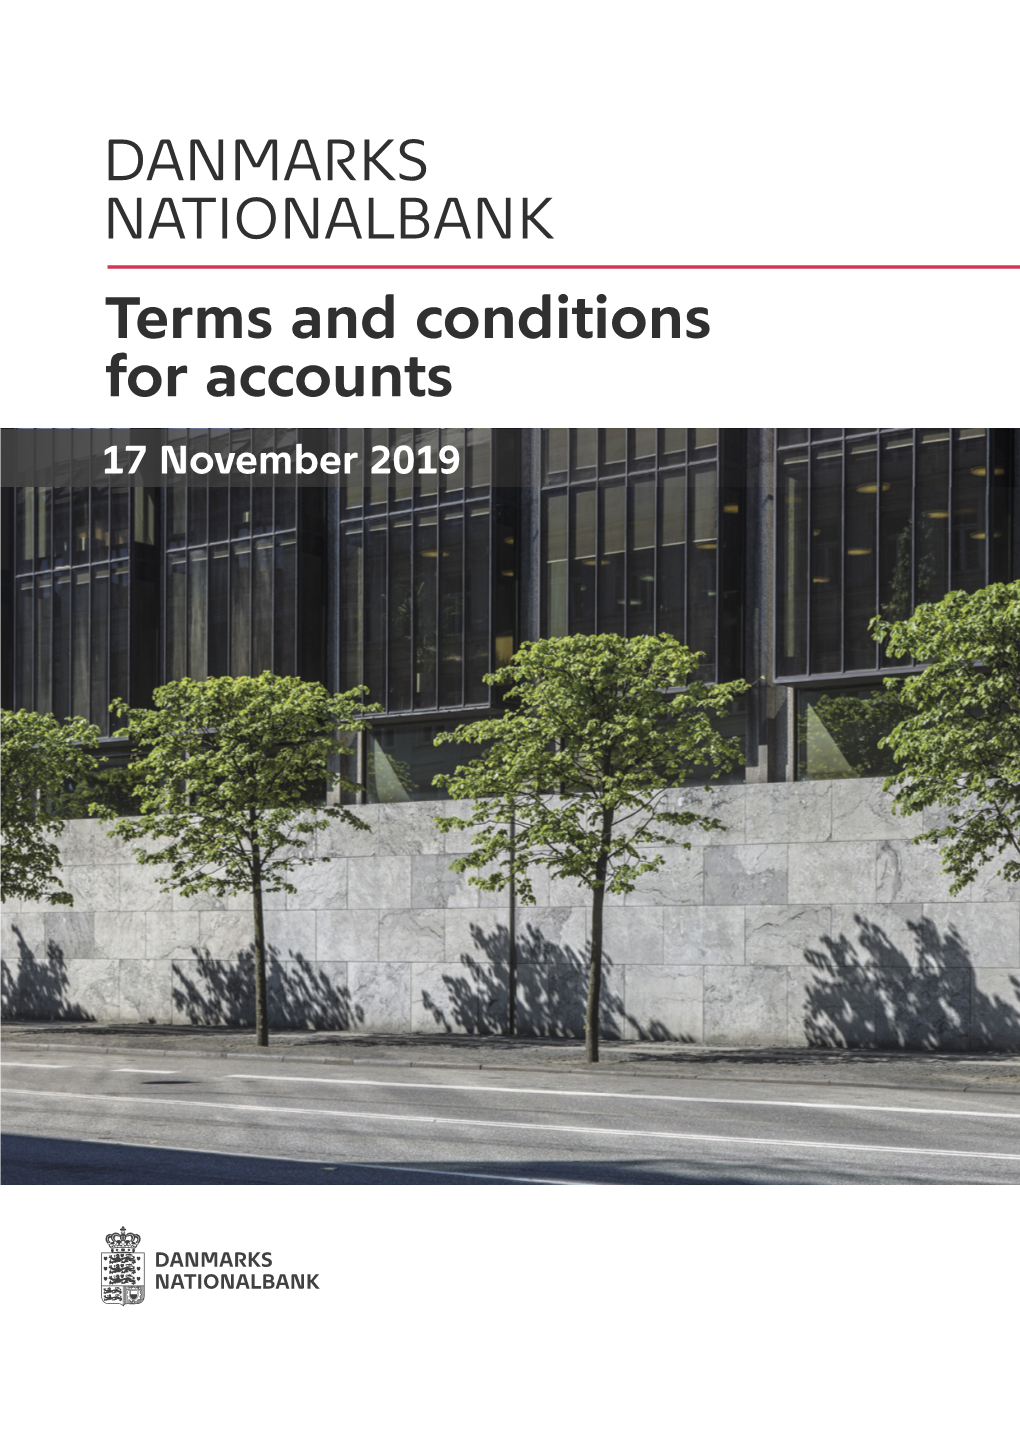 DANMARKS NATIONALBANK Terms and Conditions for Accounts 17 November 2019 DANMARKS NATIONALBANK Terms and Conditions For Accounts